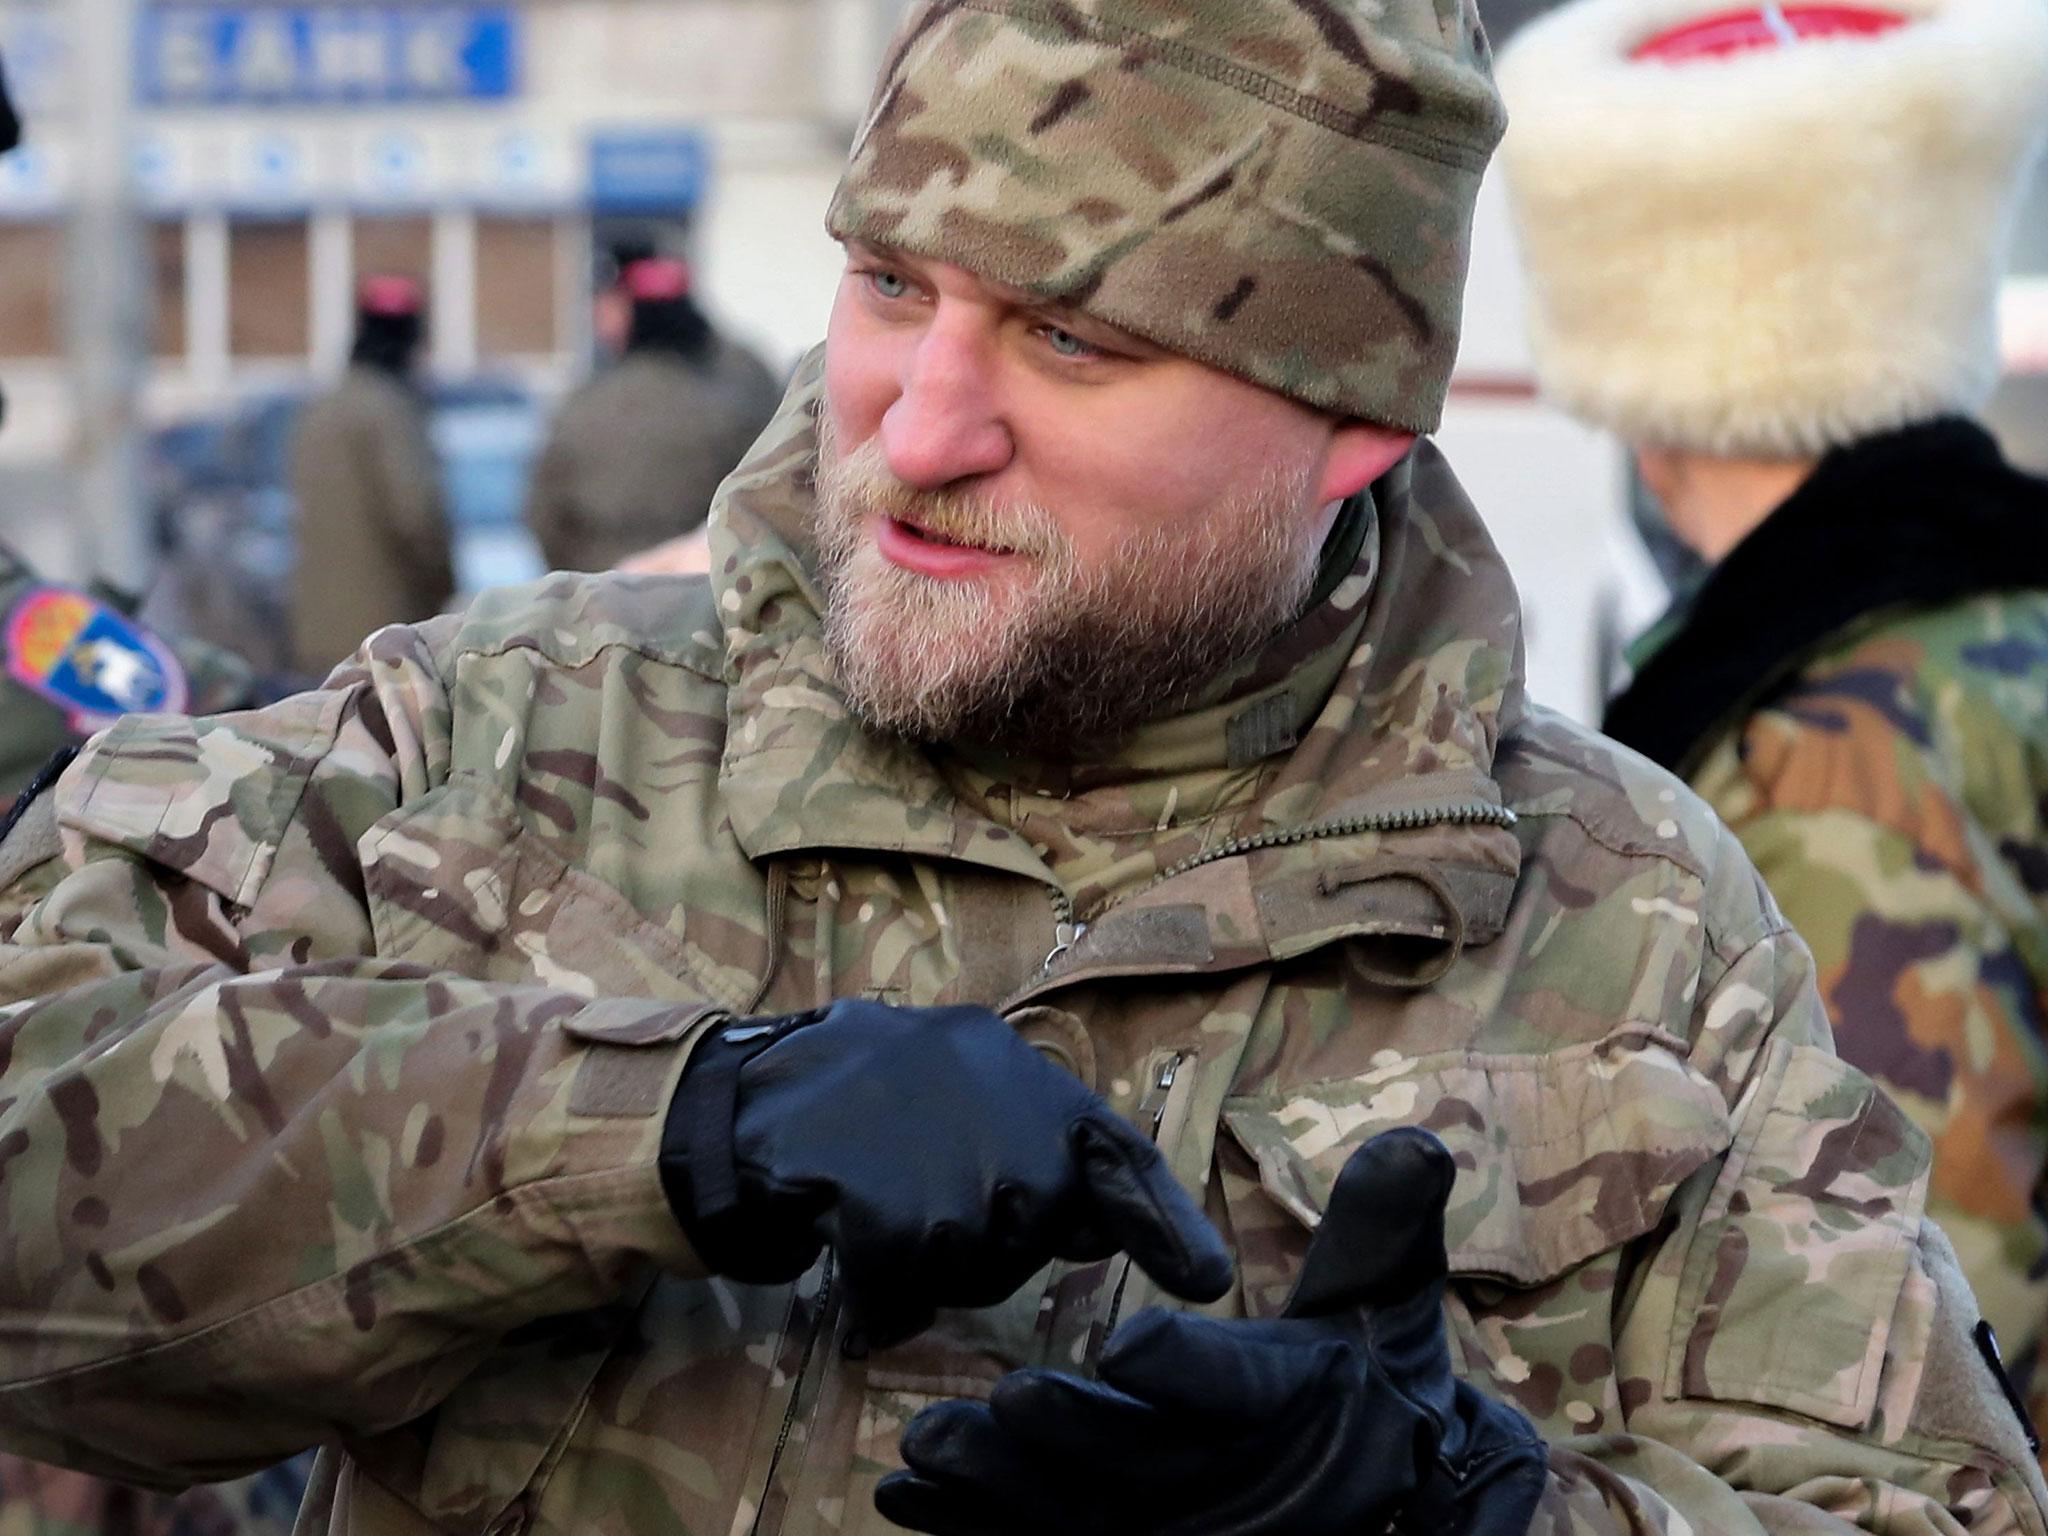 Roman Zabolotny, a chief cossack from southern Russia, one of two men identified by their respective paramilitary associations as being shown held in Syria by Isis